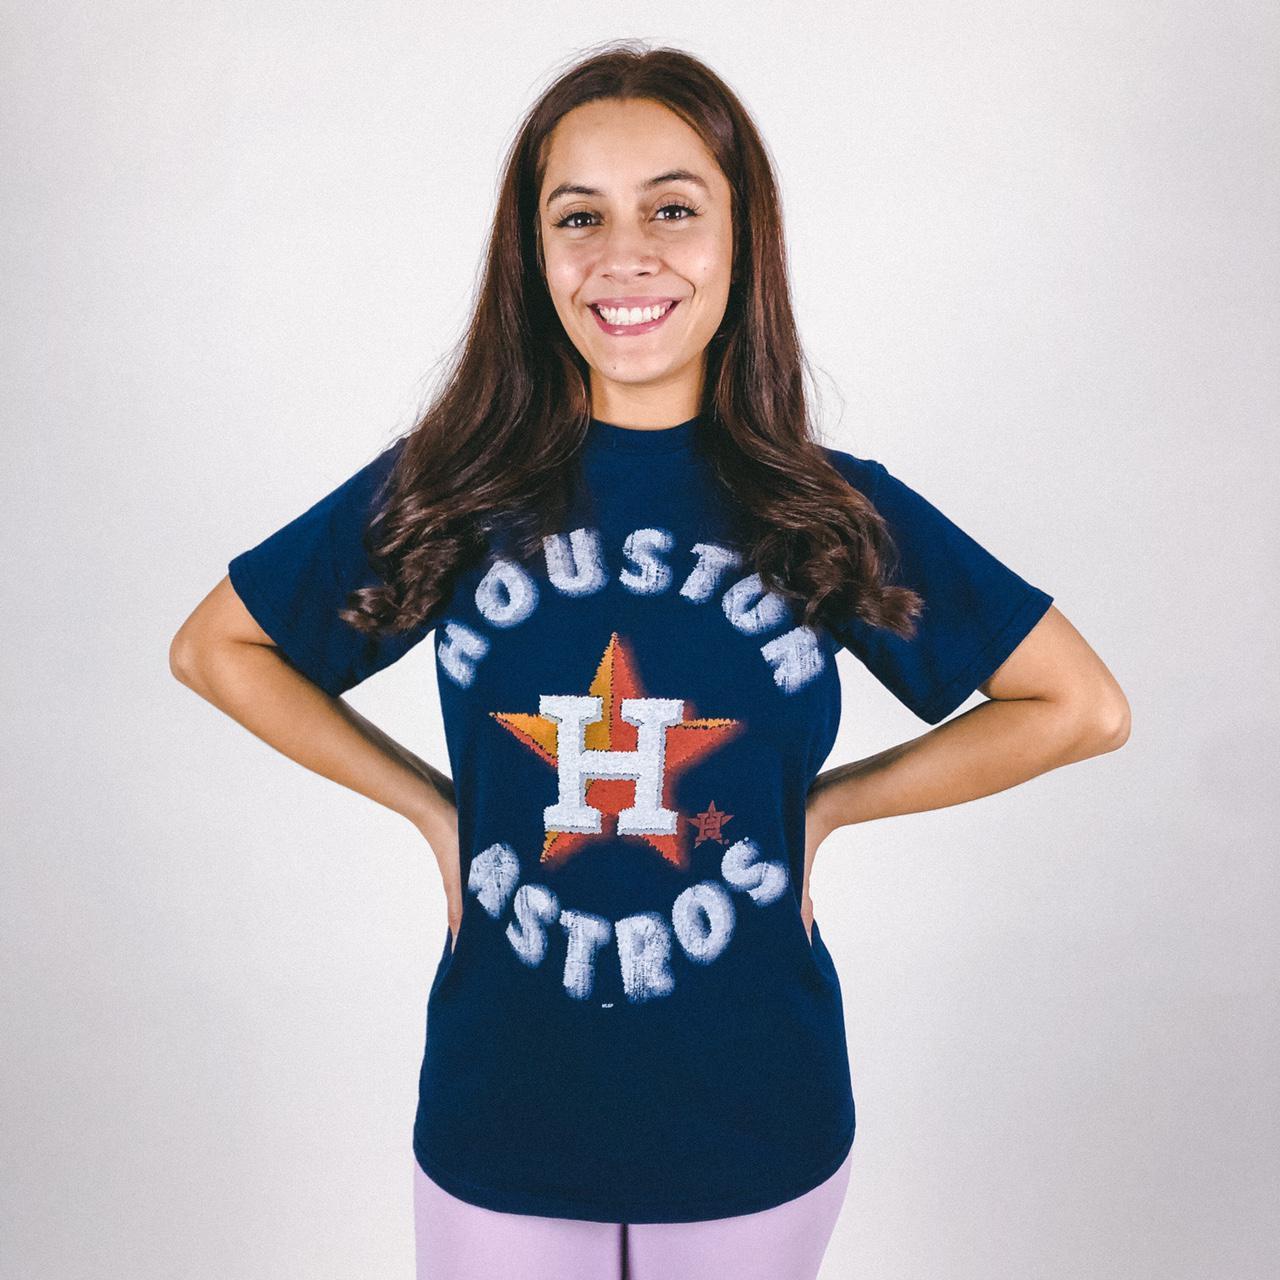 Product Image 1 - Houston Astros Tee Size S
/
8/10
/
This